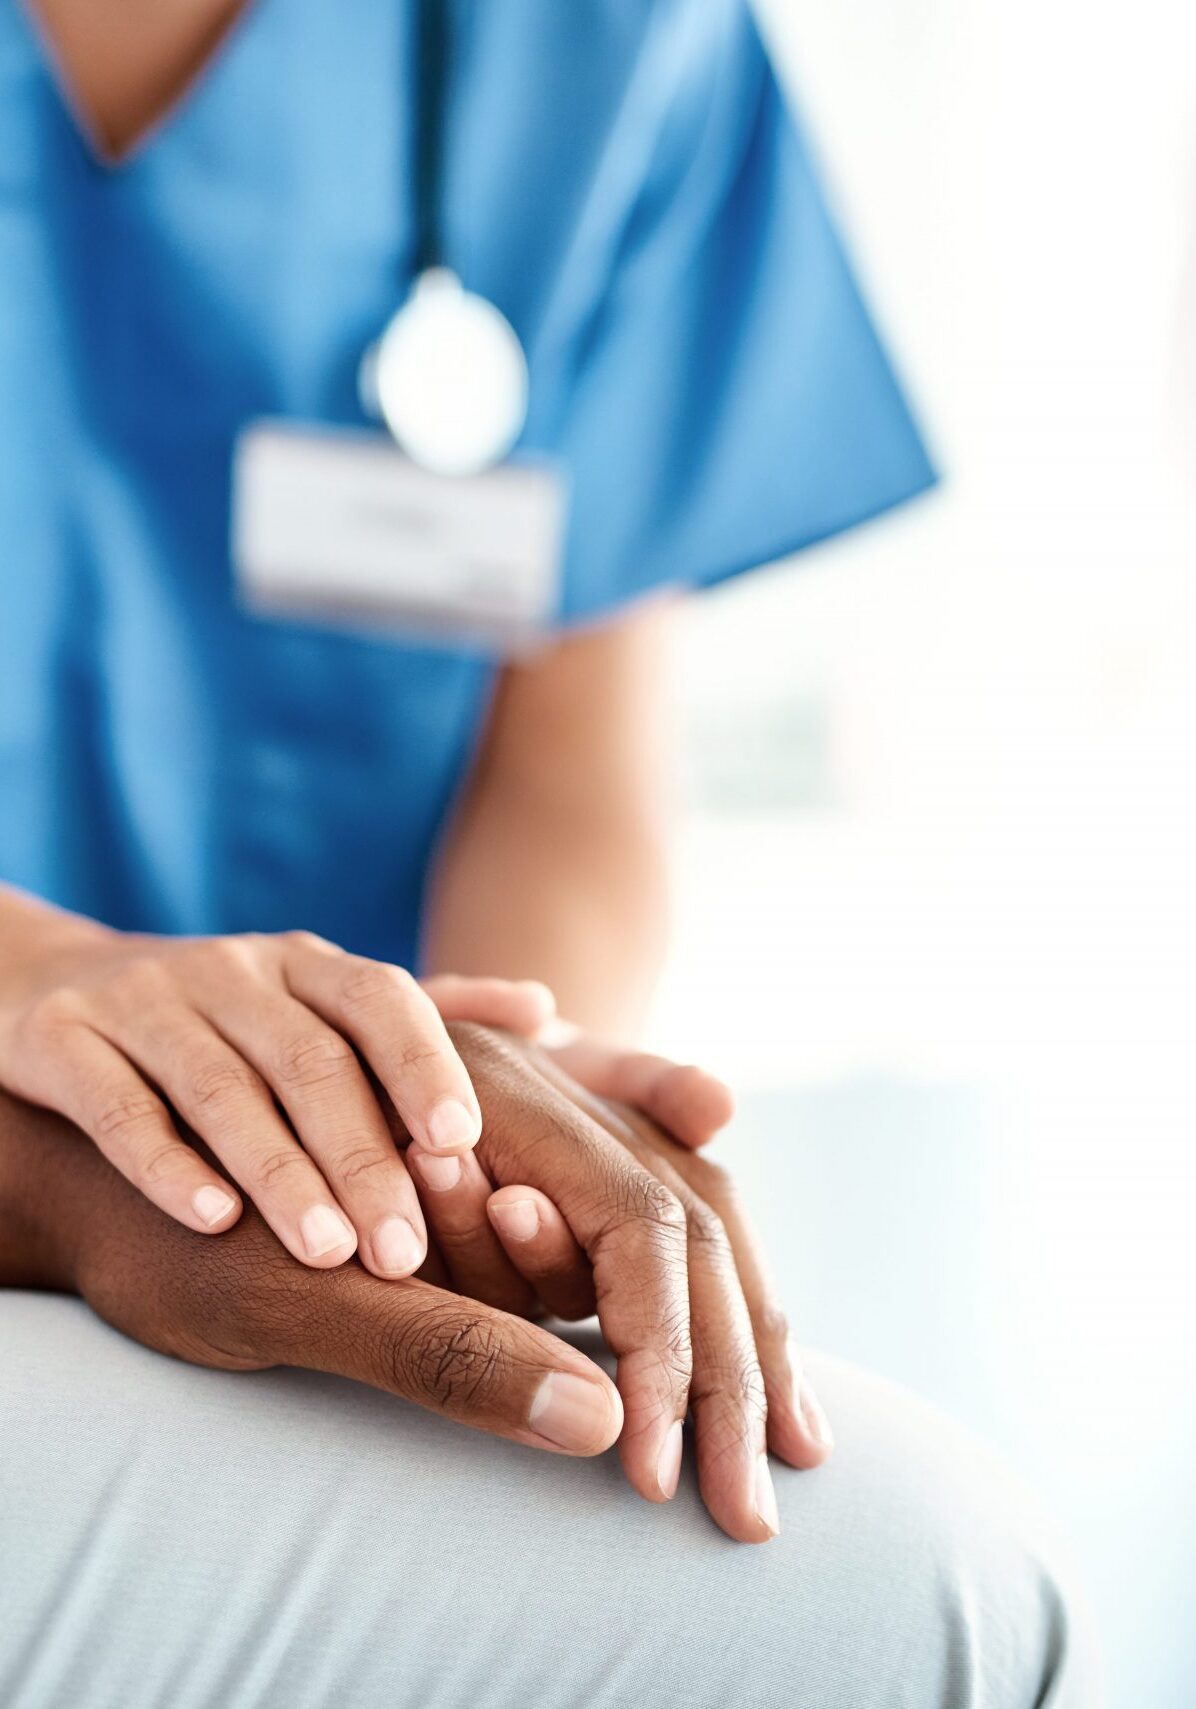 Nurse holding the hands of a patient